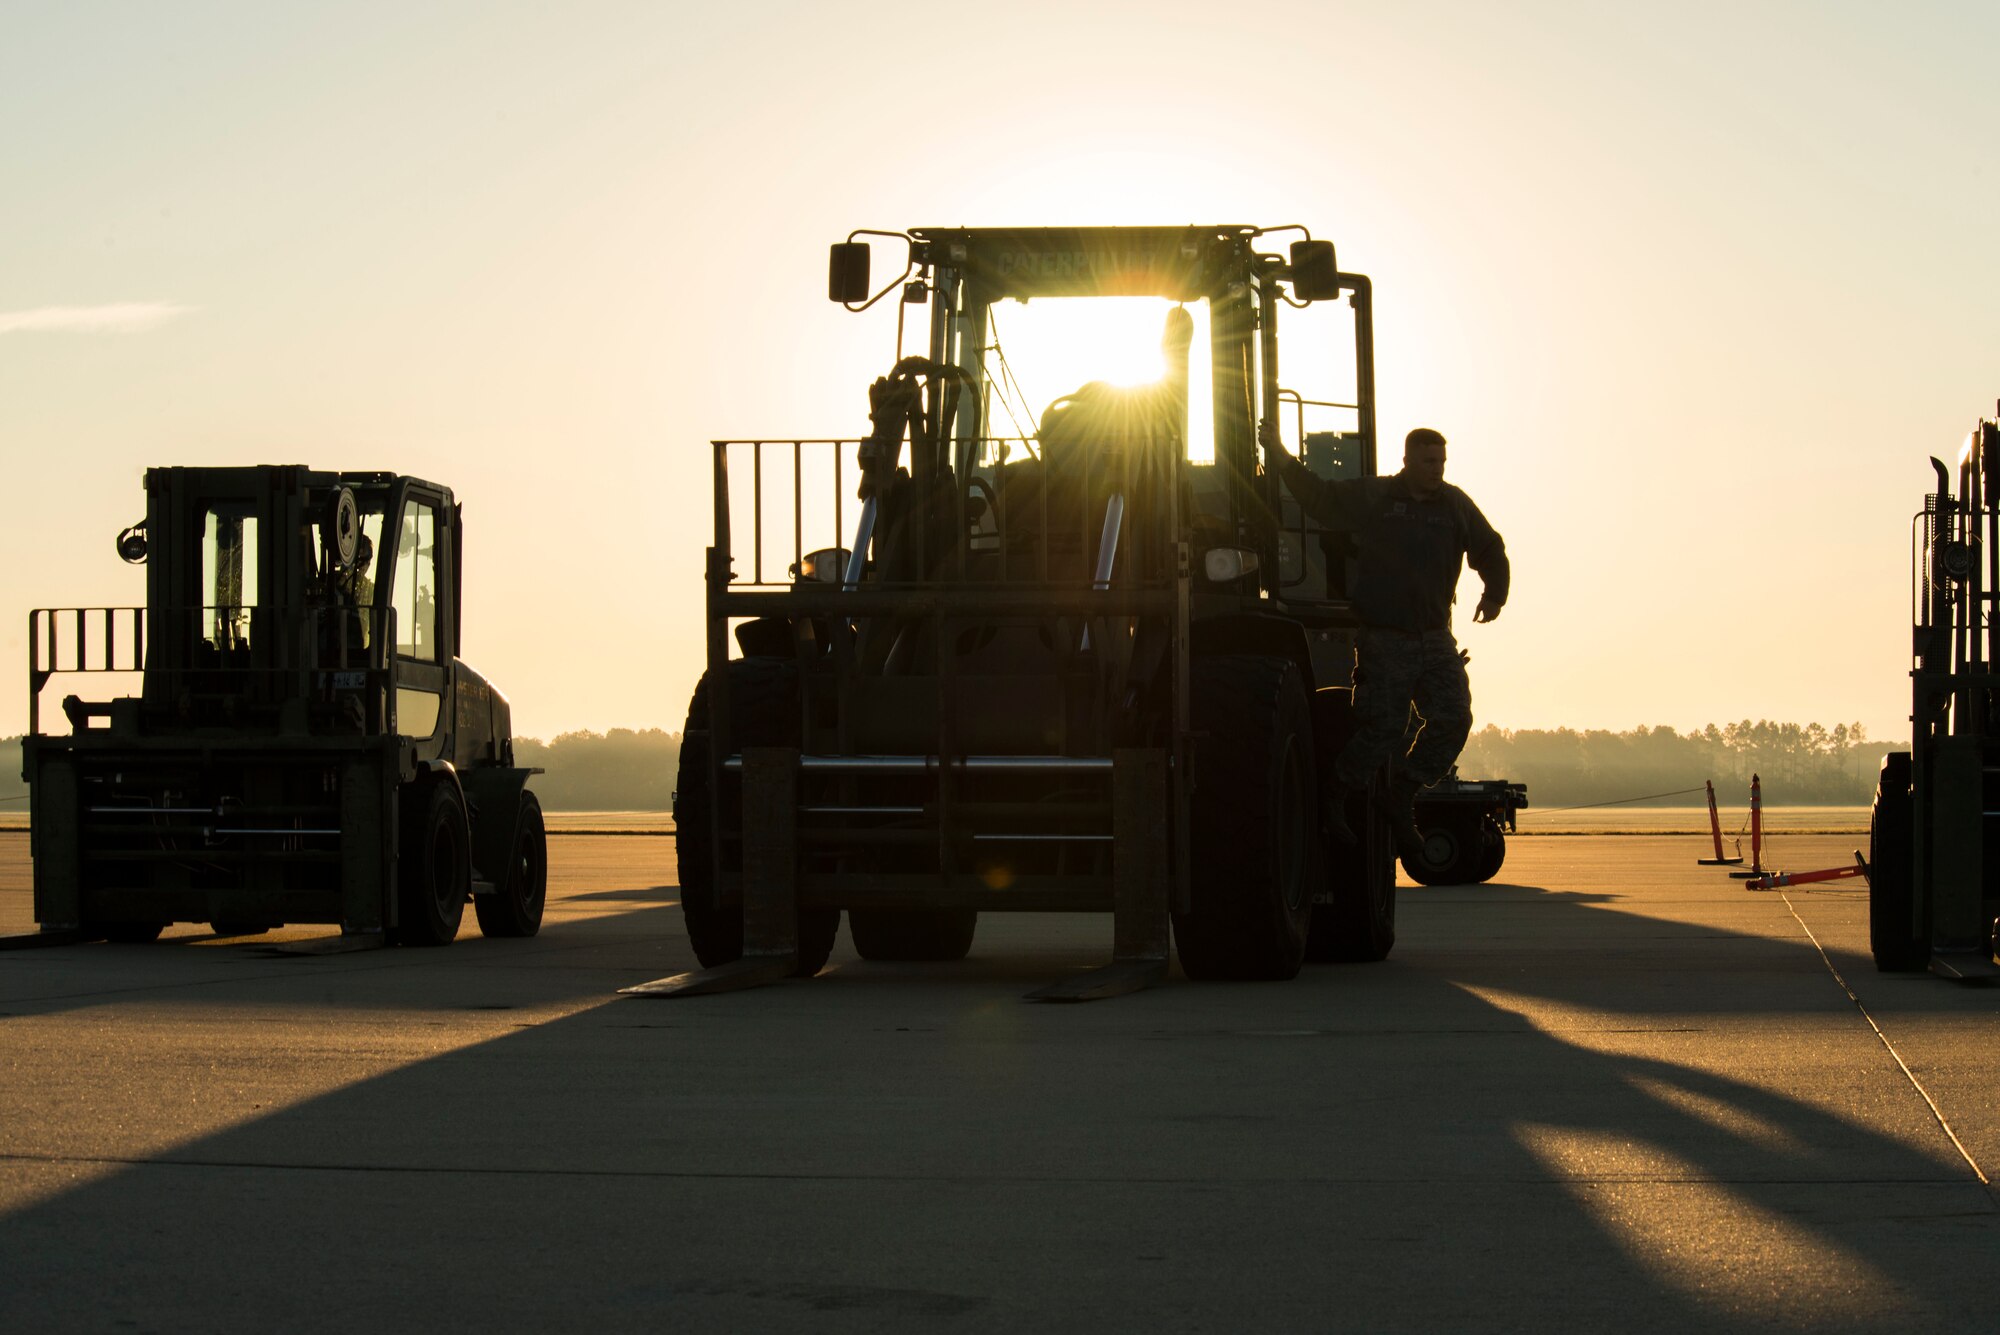 A U.S. Airman climbs out of a forklift on the flightline of Shaw Air Force Base, South Carolina, Nov. 1, 2017.